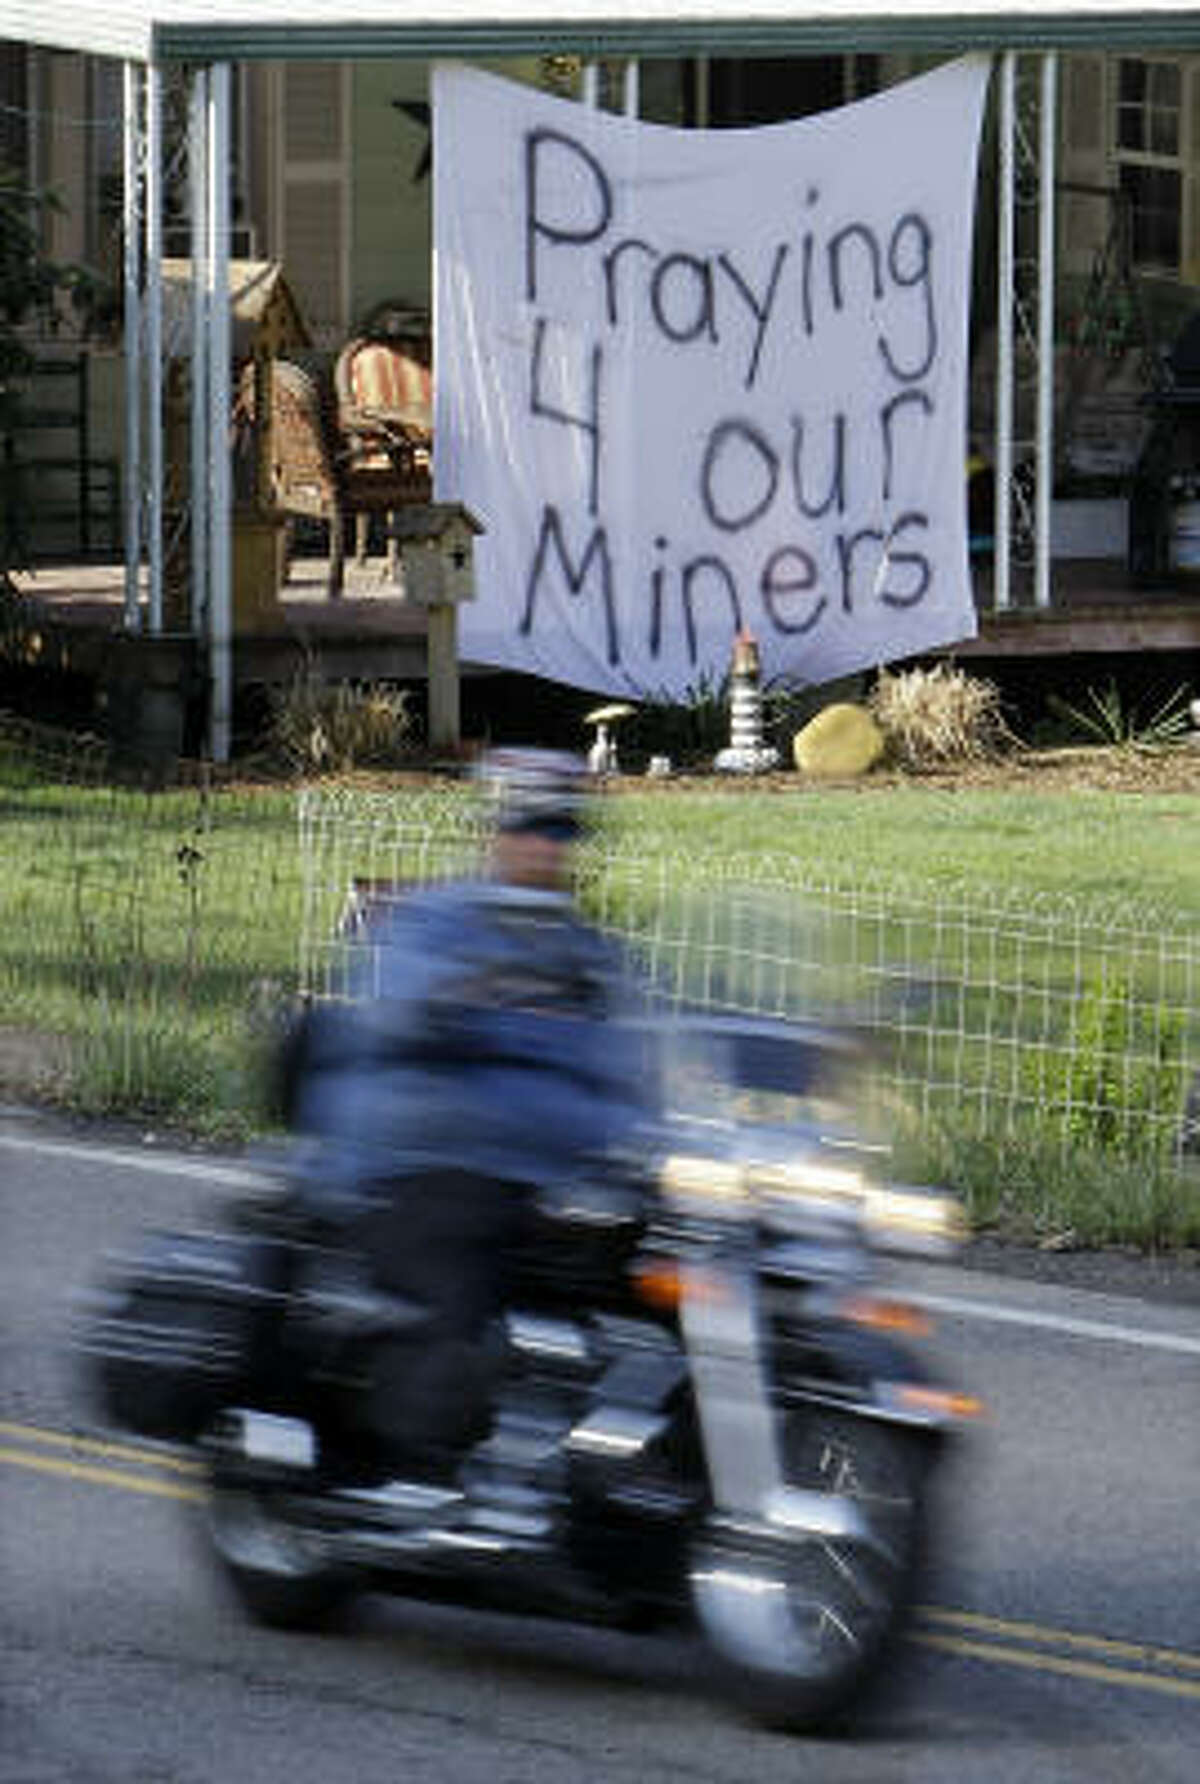 A sign expressing hope for coal miners hangs at a home in Montcoal, W.Va., on Tuesday.